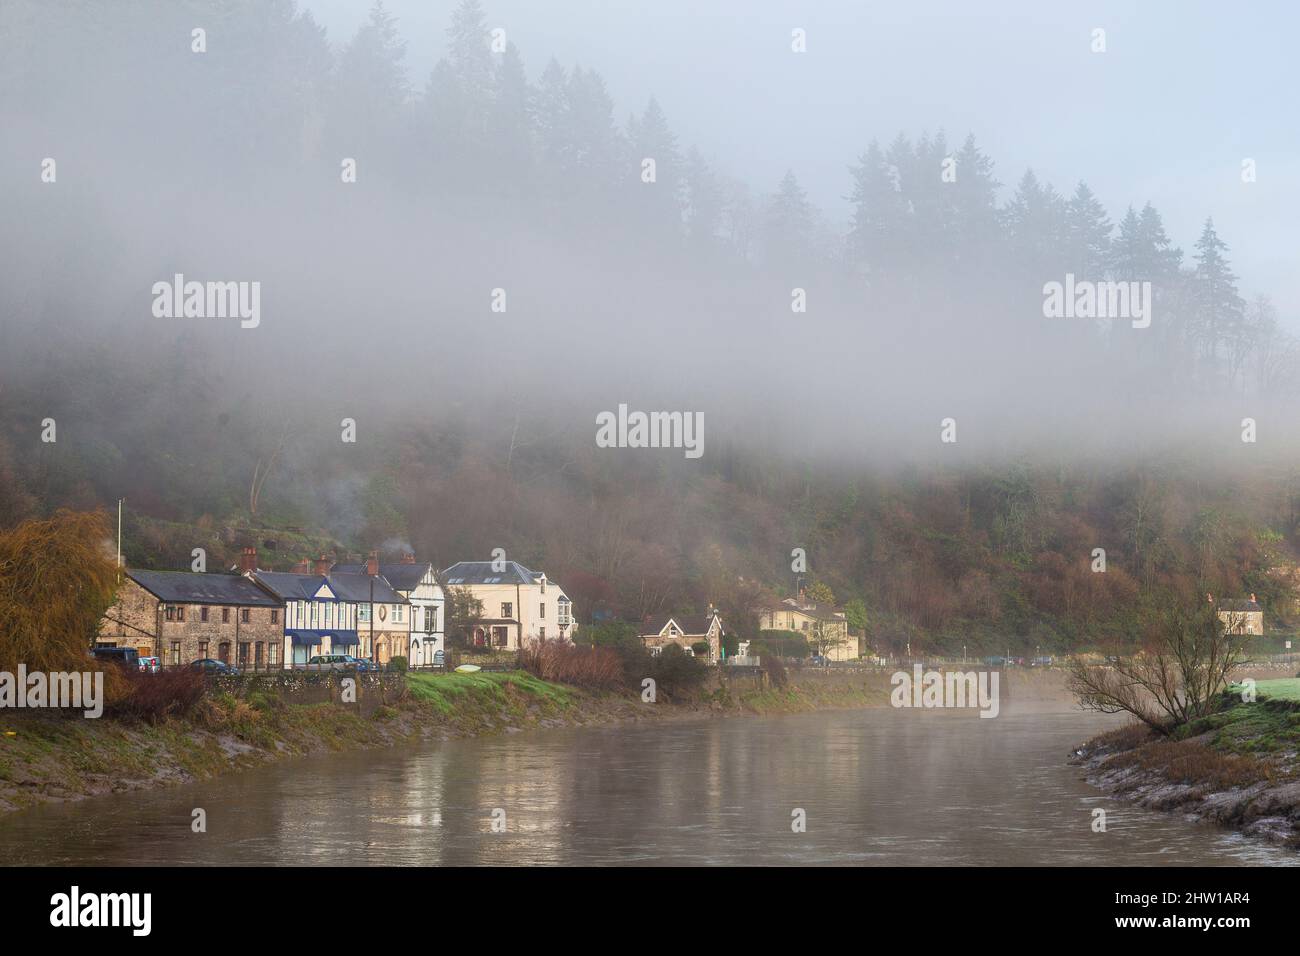 Tintern, Monmouthshire, on the River Wye Stock Photo